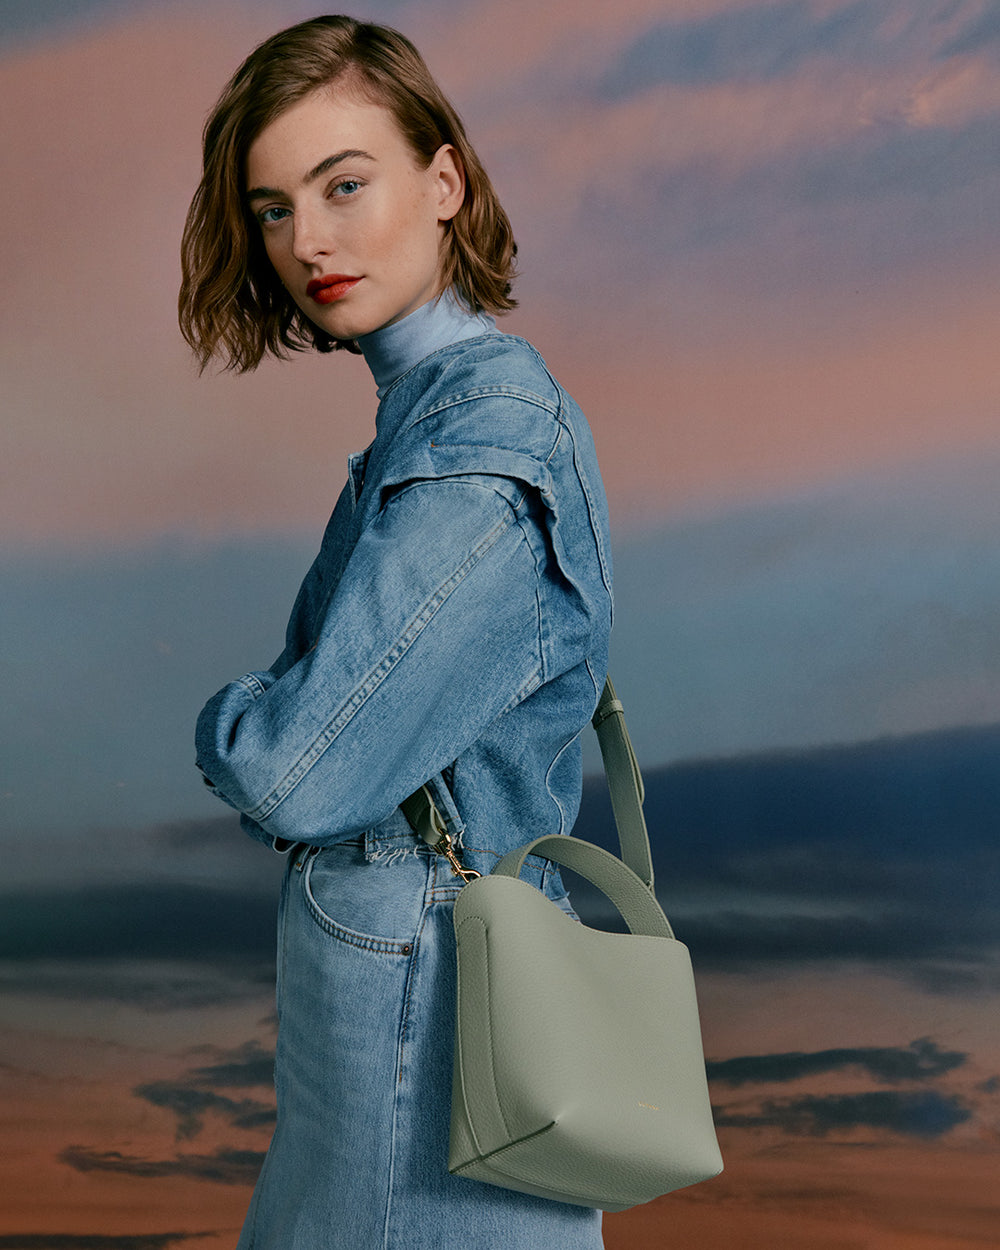 Woman in denim outfit carrying a handbag, looking over shoulder.